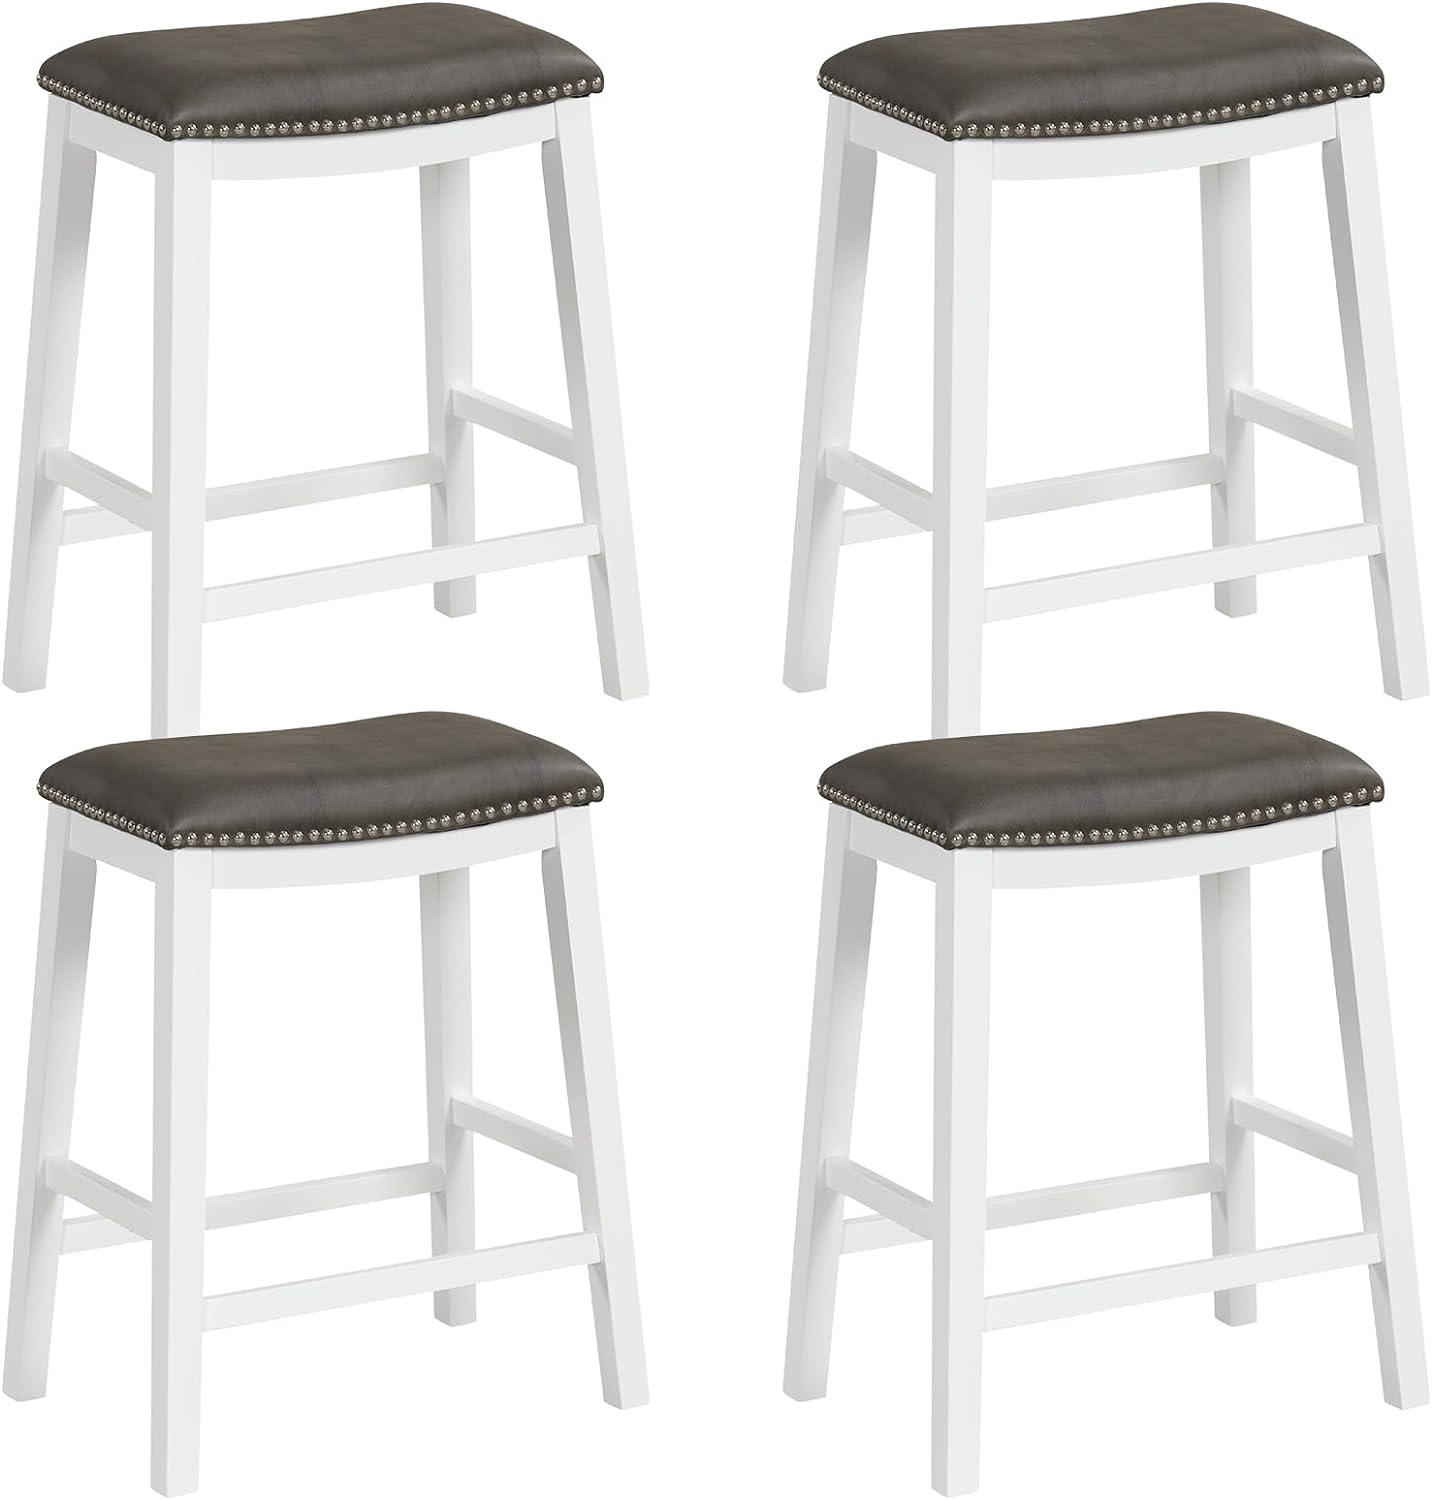 Giantex 26" Counter Height Bar Stools Set of 2, Faux PVC Leather Farmhouse Barstools w/Padded Seat